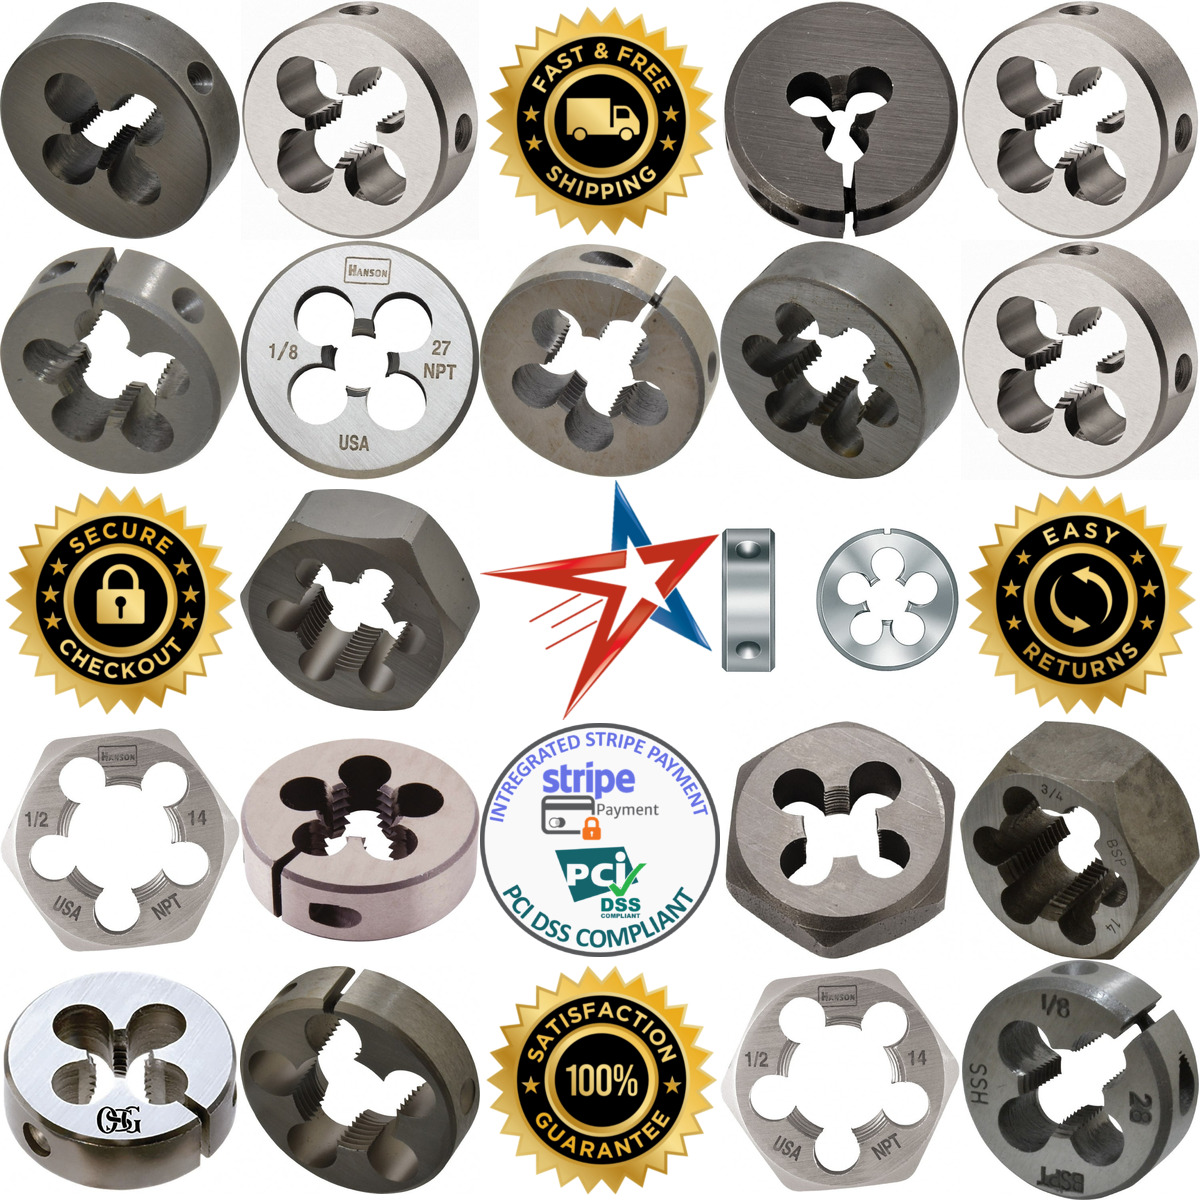 A selection of Round and Hex Pipe Dies products on GoVets